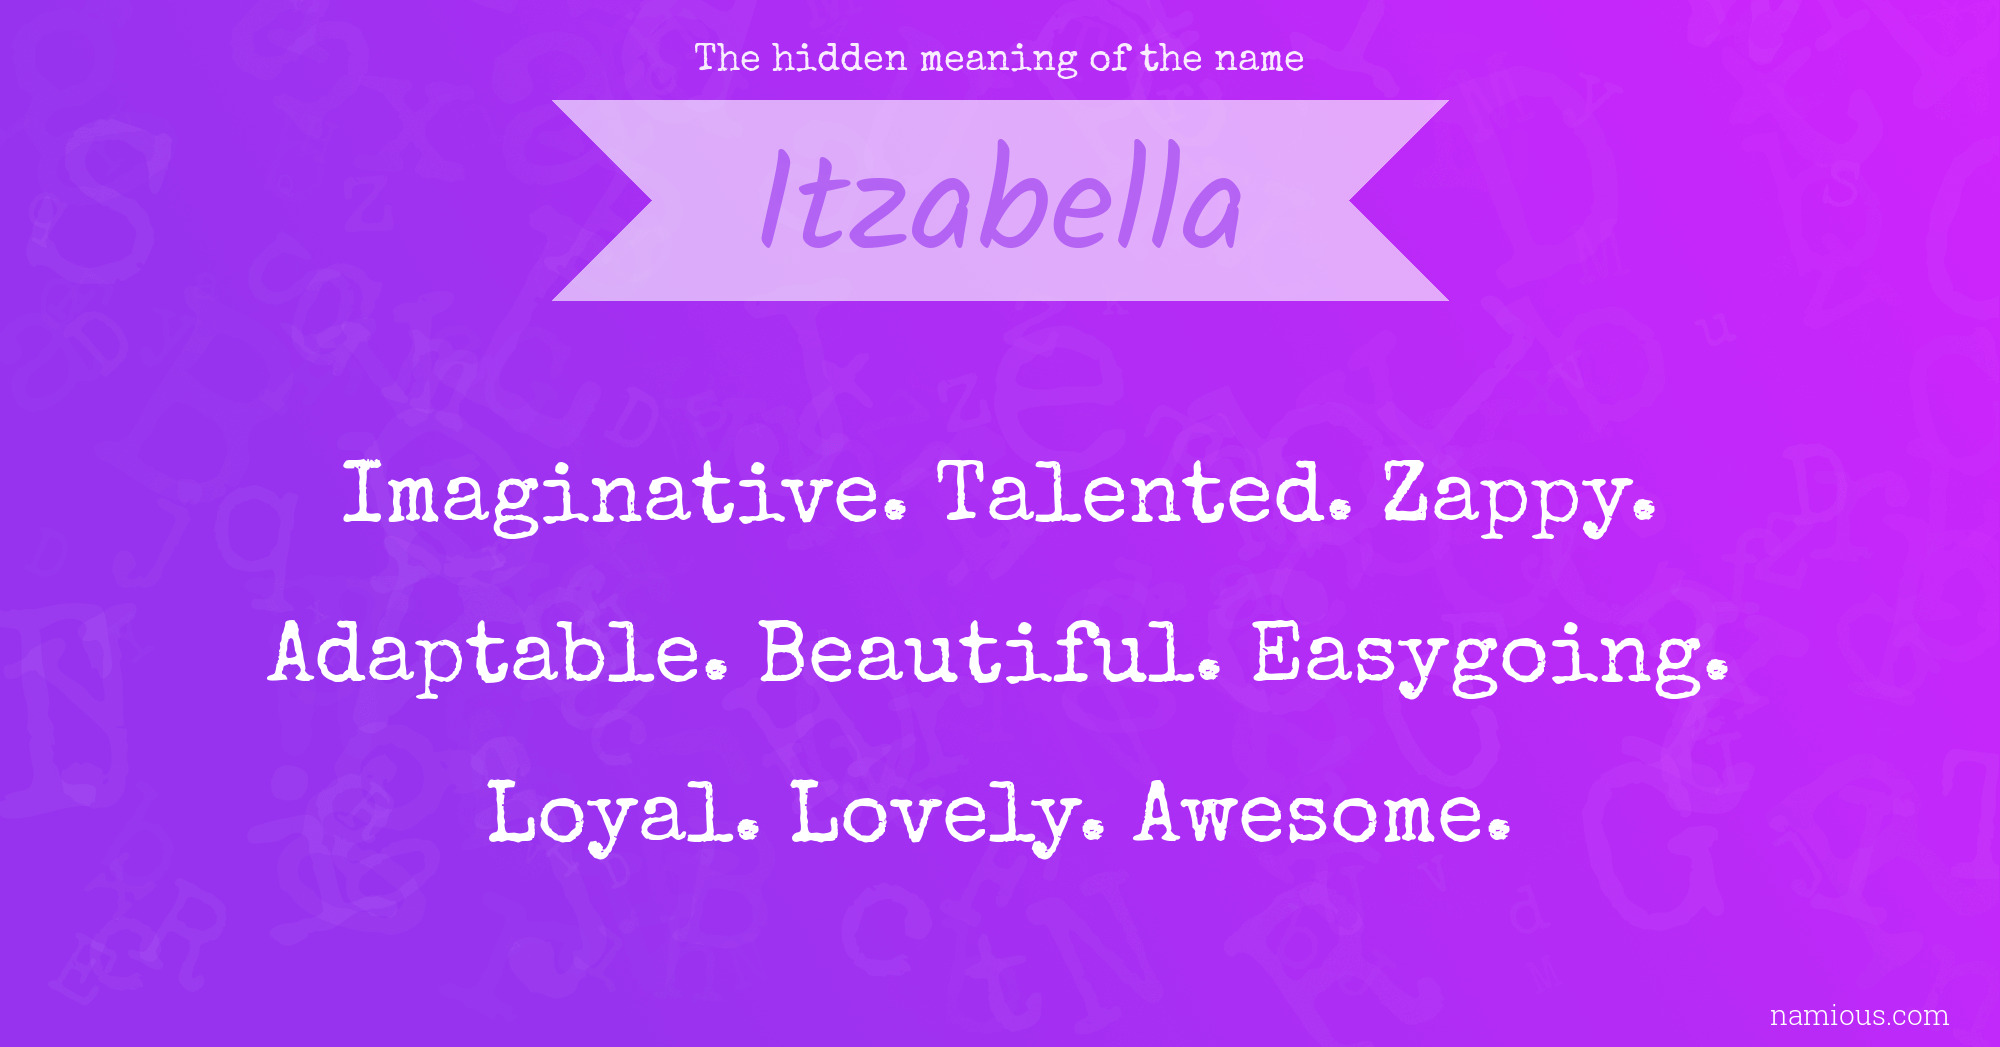 The hidden meaning of the name Itzabella